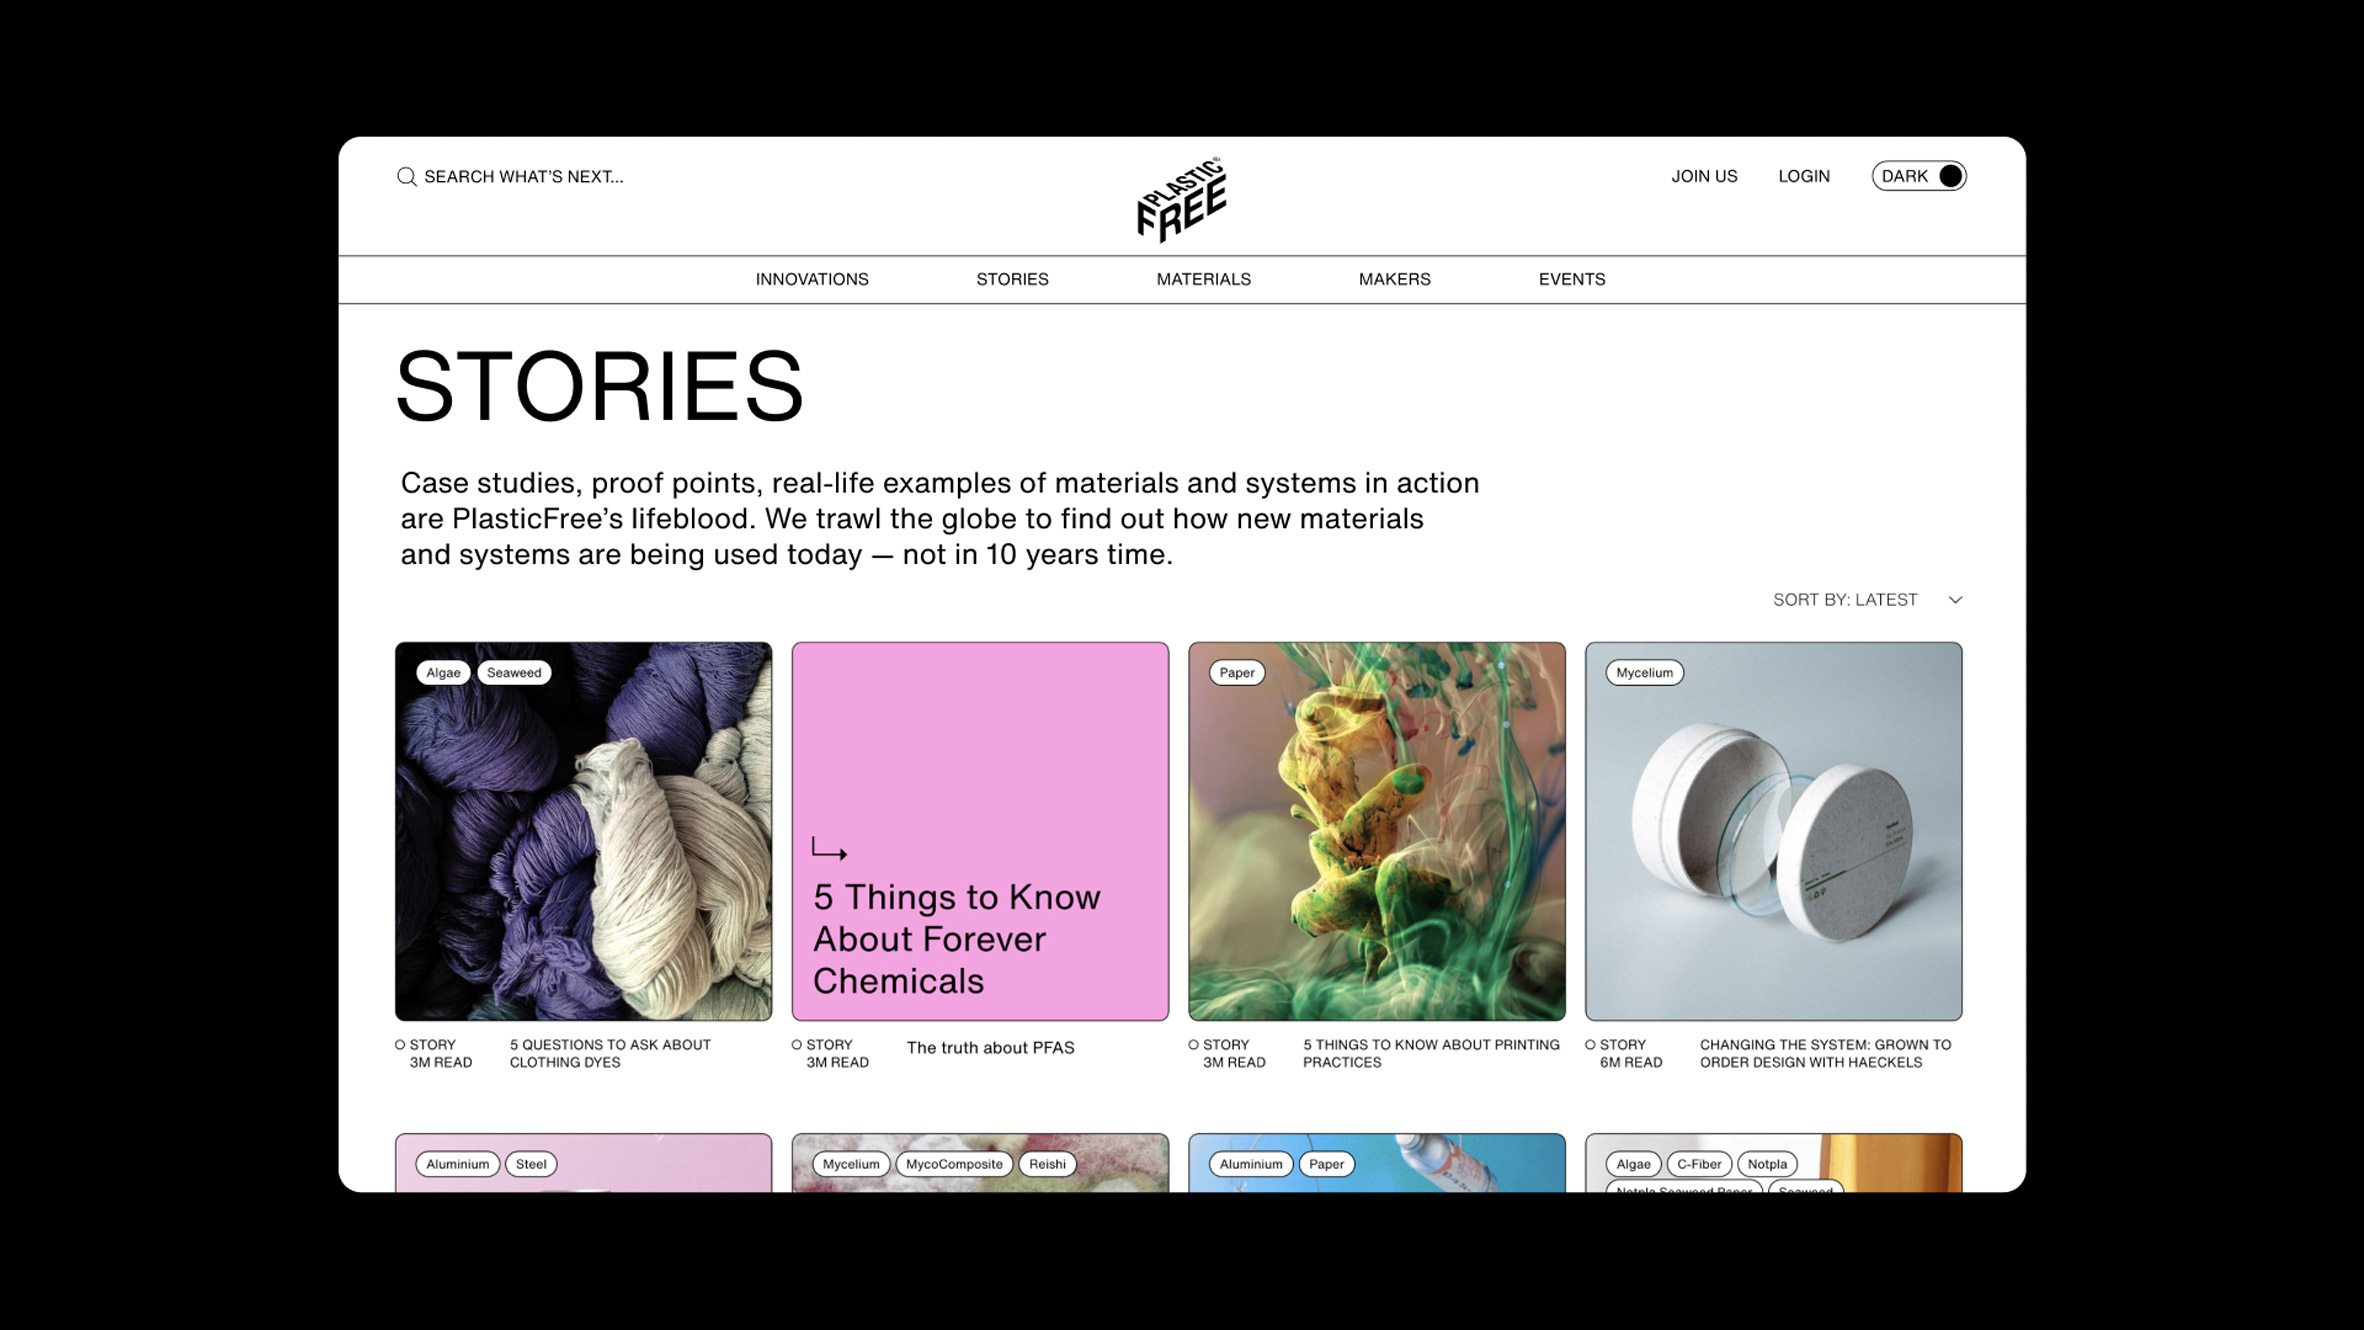 Screenshot of a website showing different editorial content about plastic alternatives